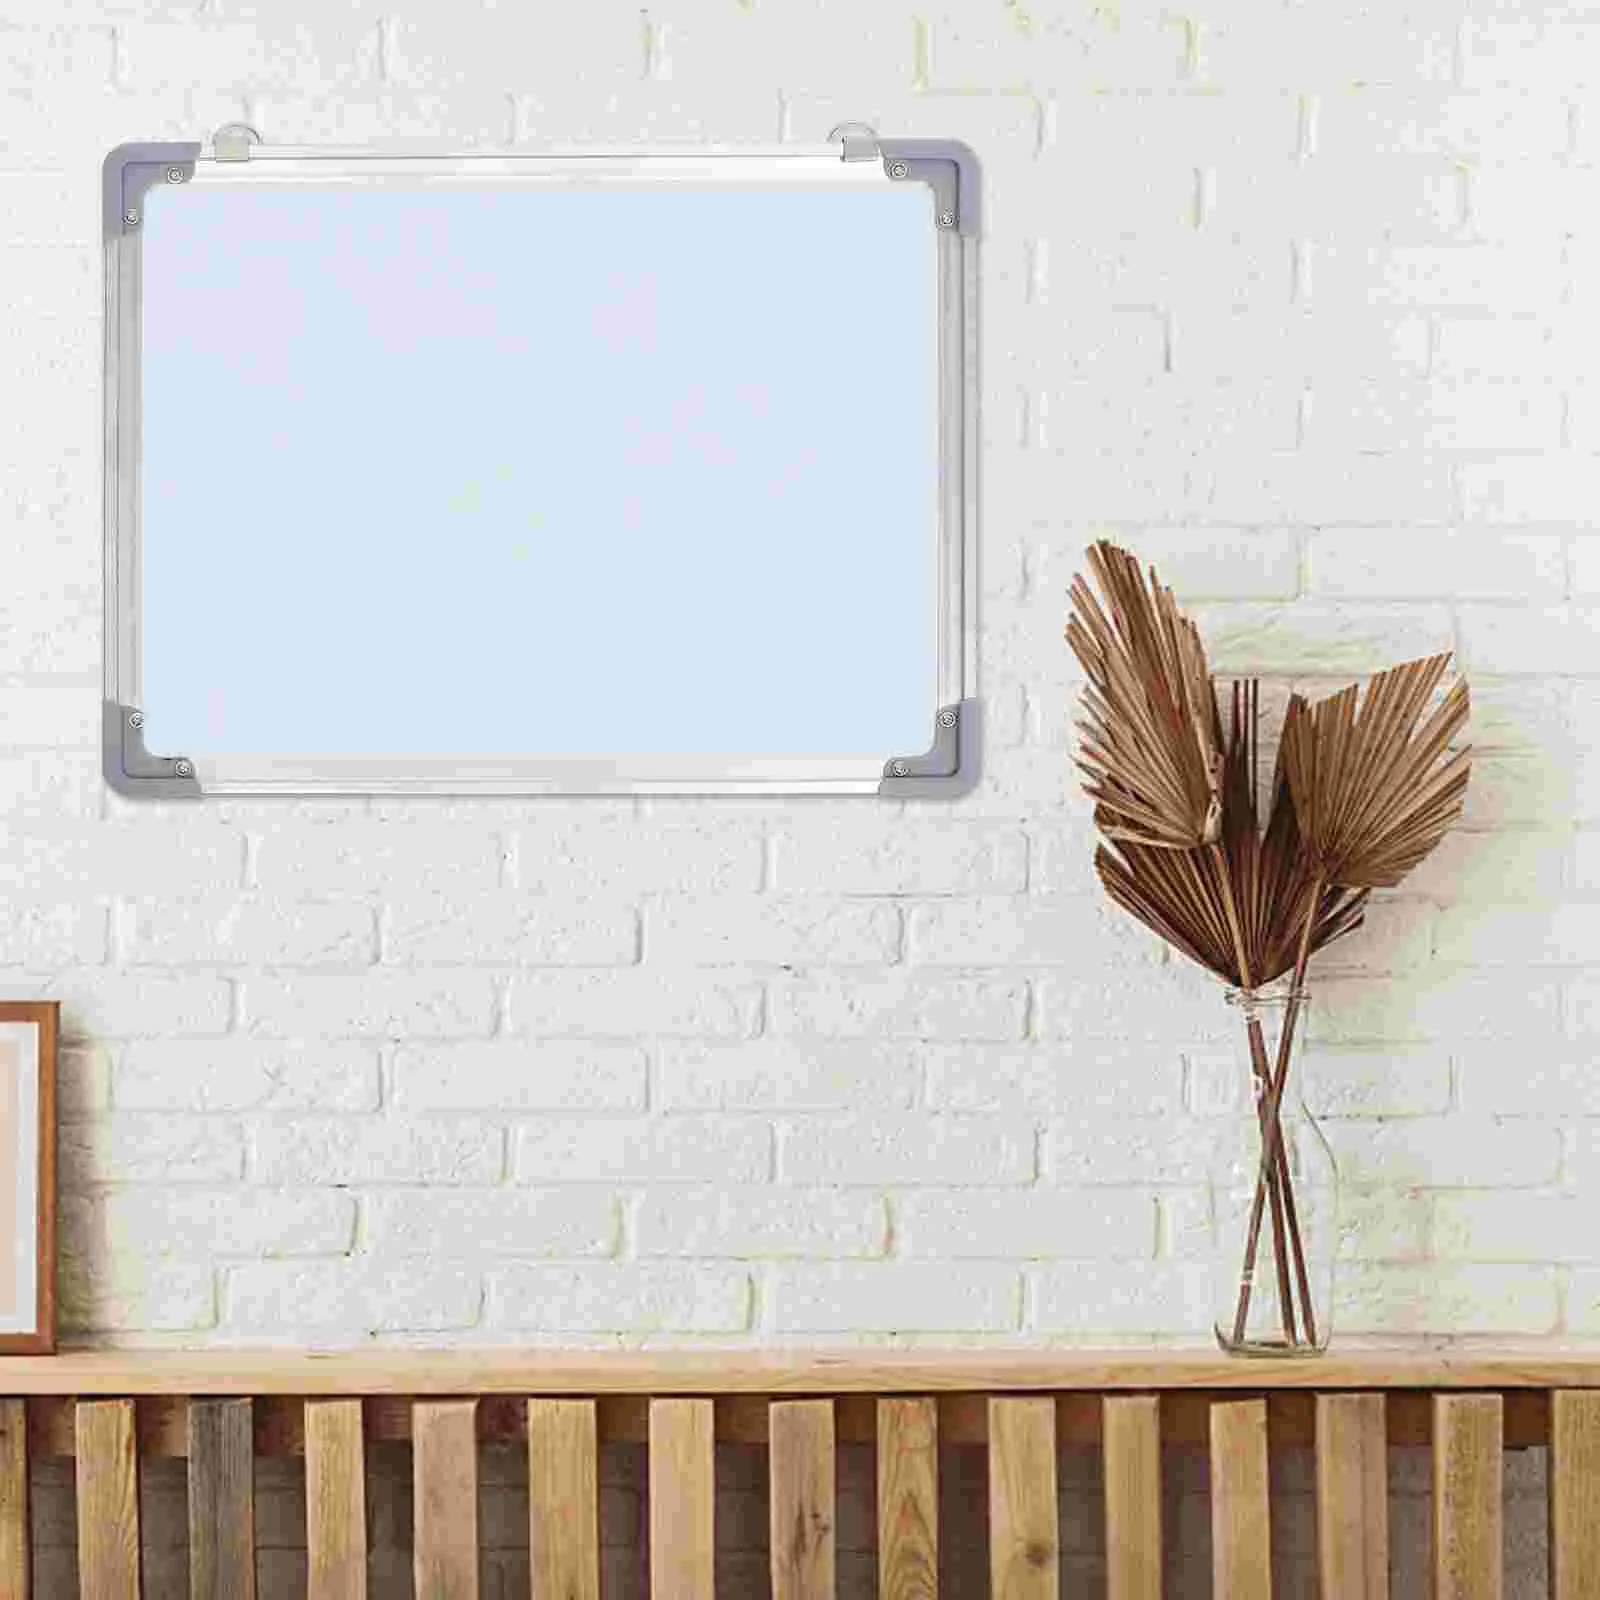 

Double-sided Board Dry Erase Whiteboard White Writing Wall Kids Hanging Double Sided Erasable Drawing Message Planner Memo Easel